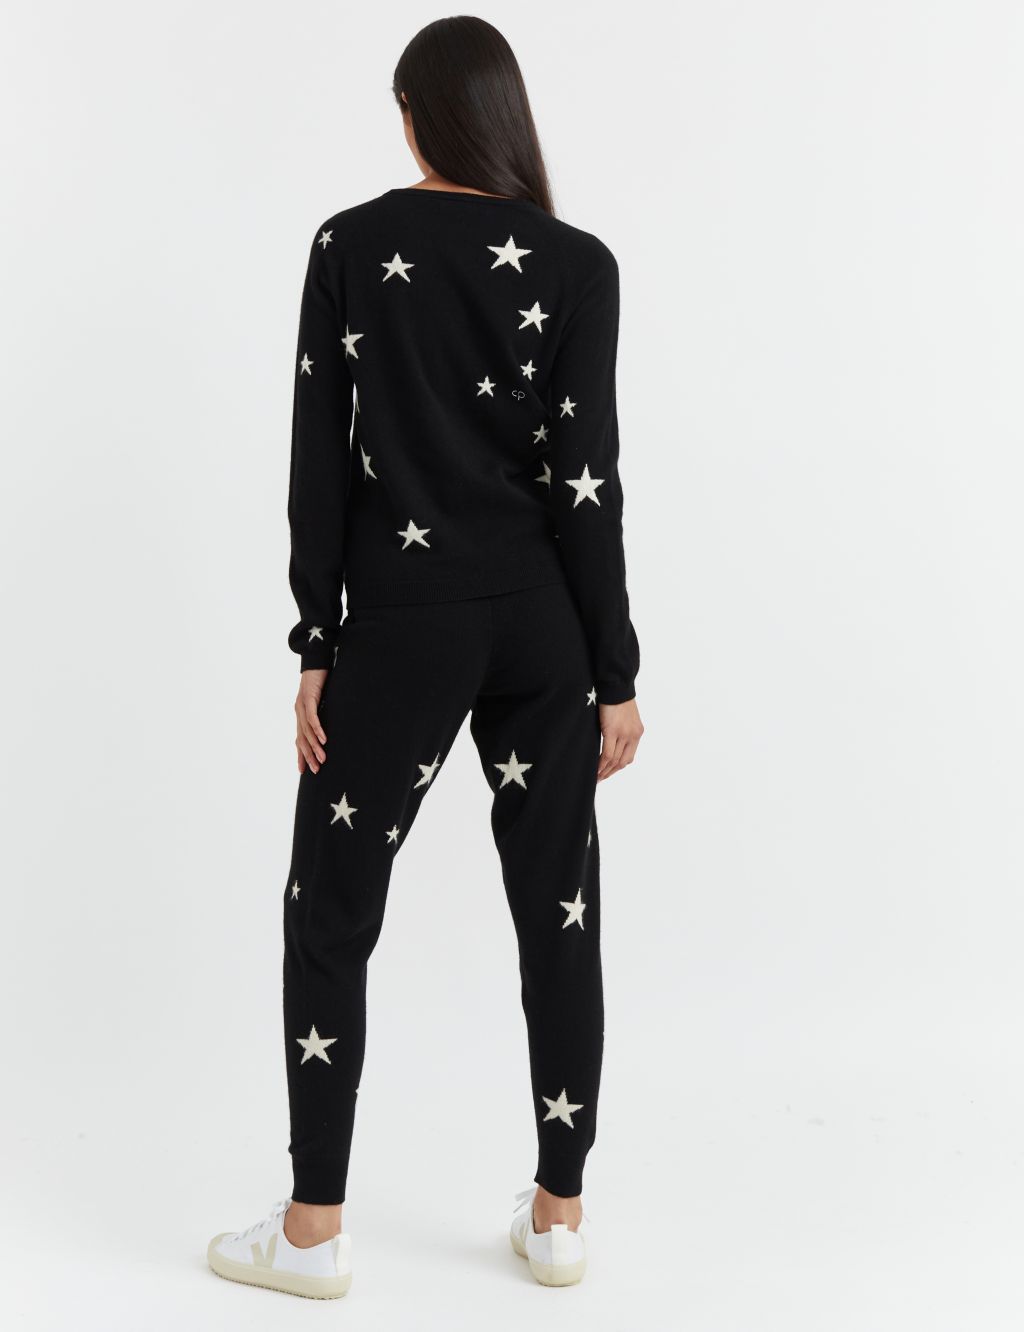 Wool Rich with Cashmere Star Print Joggers image 3